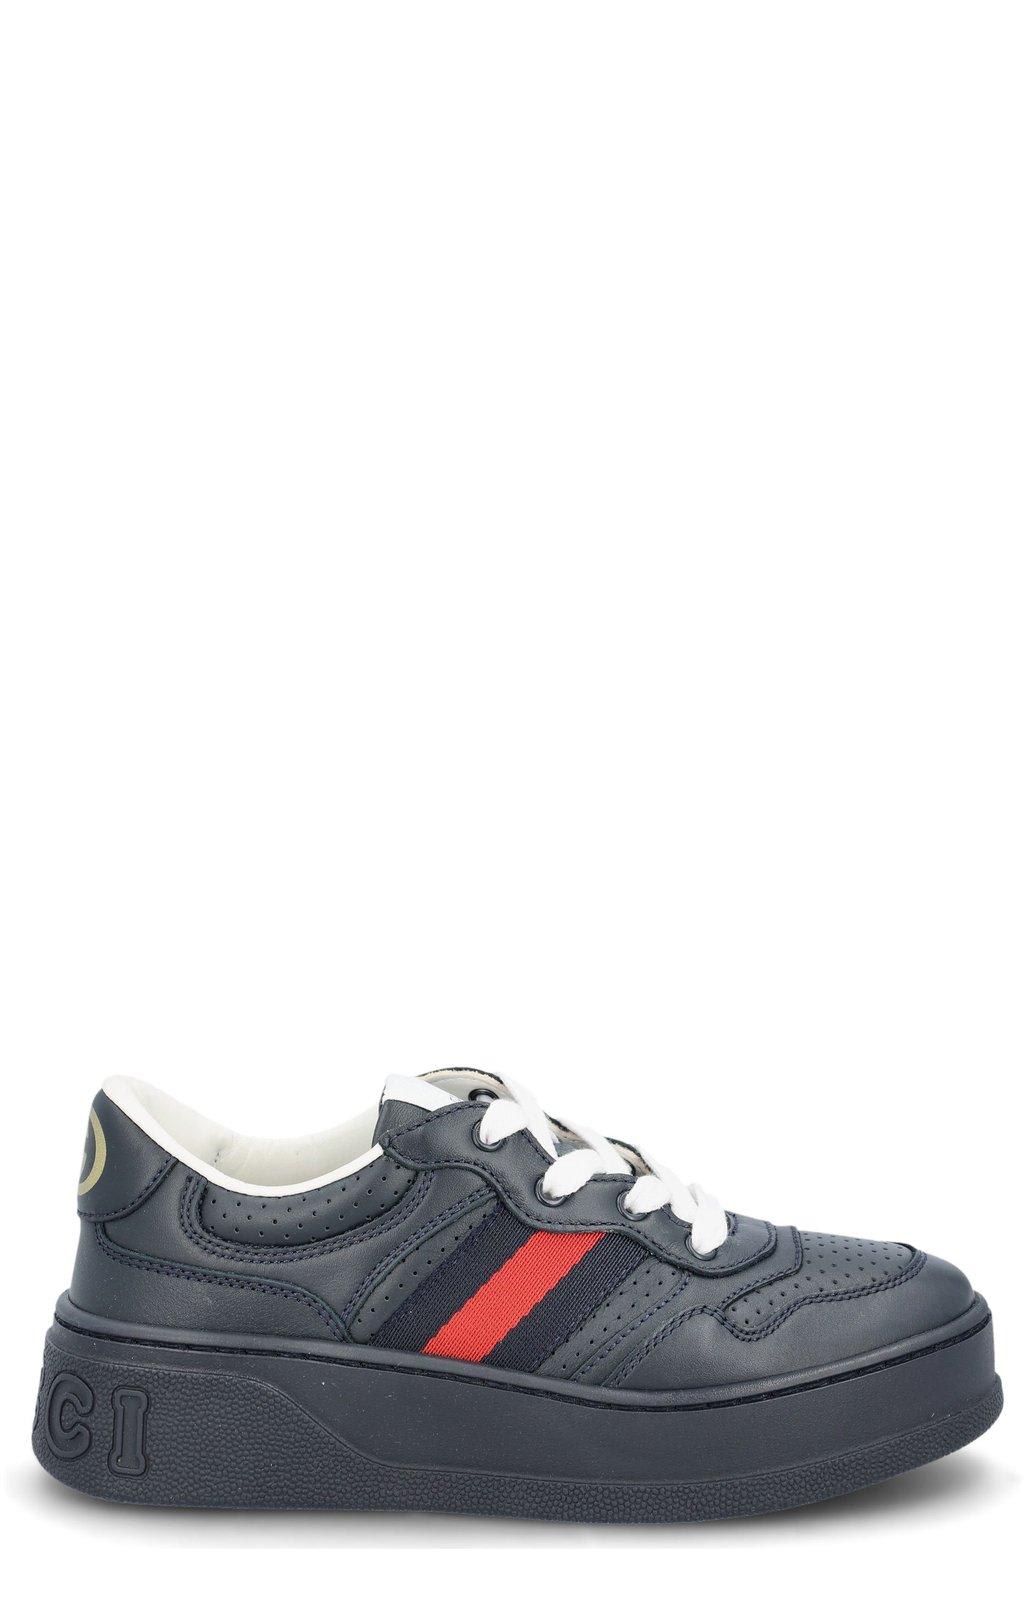 Gucci Web Detailed Low-top Sneakers